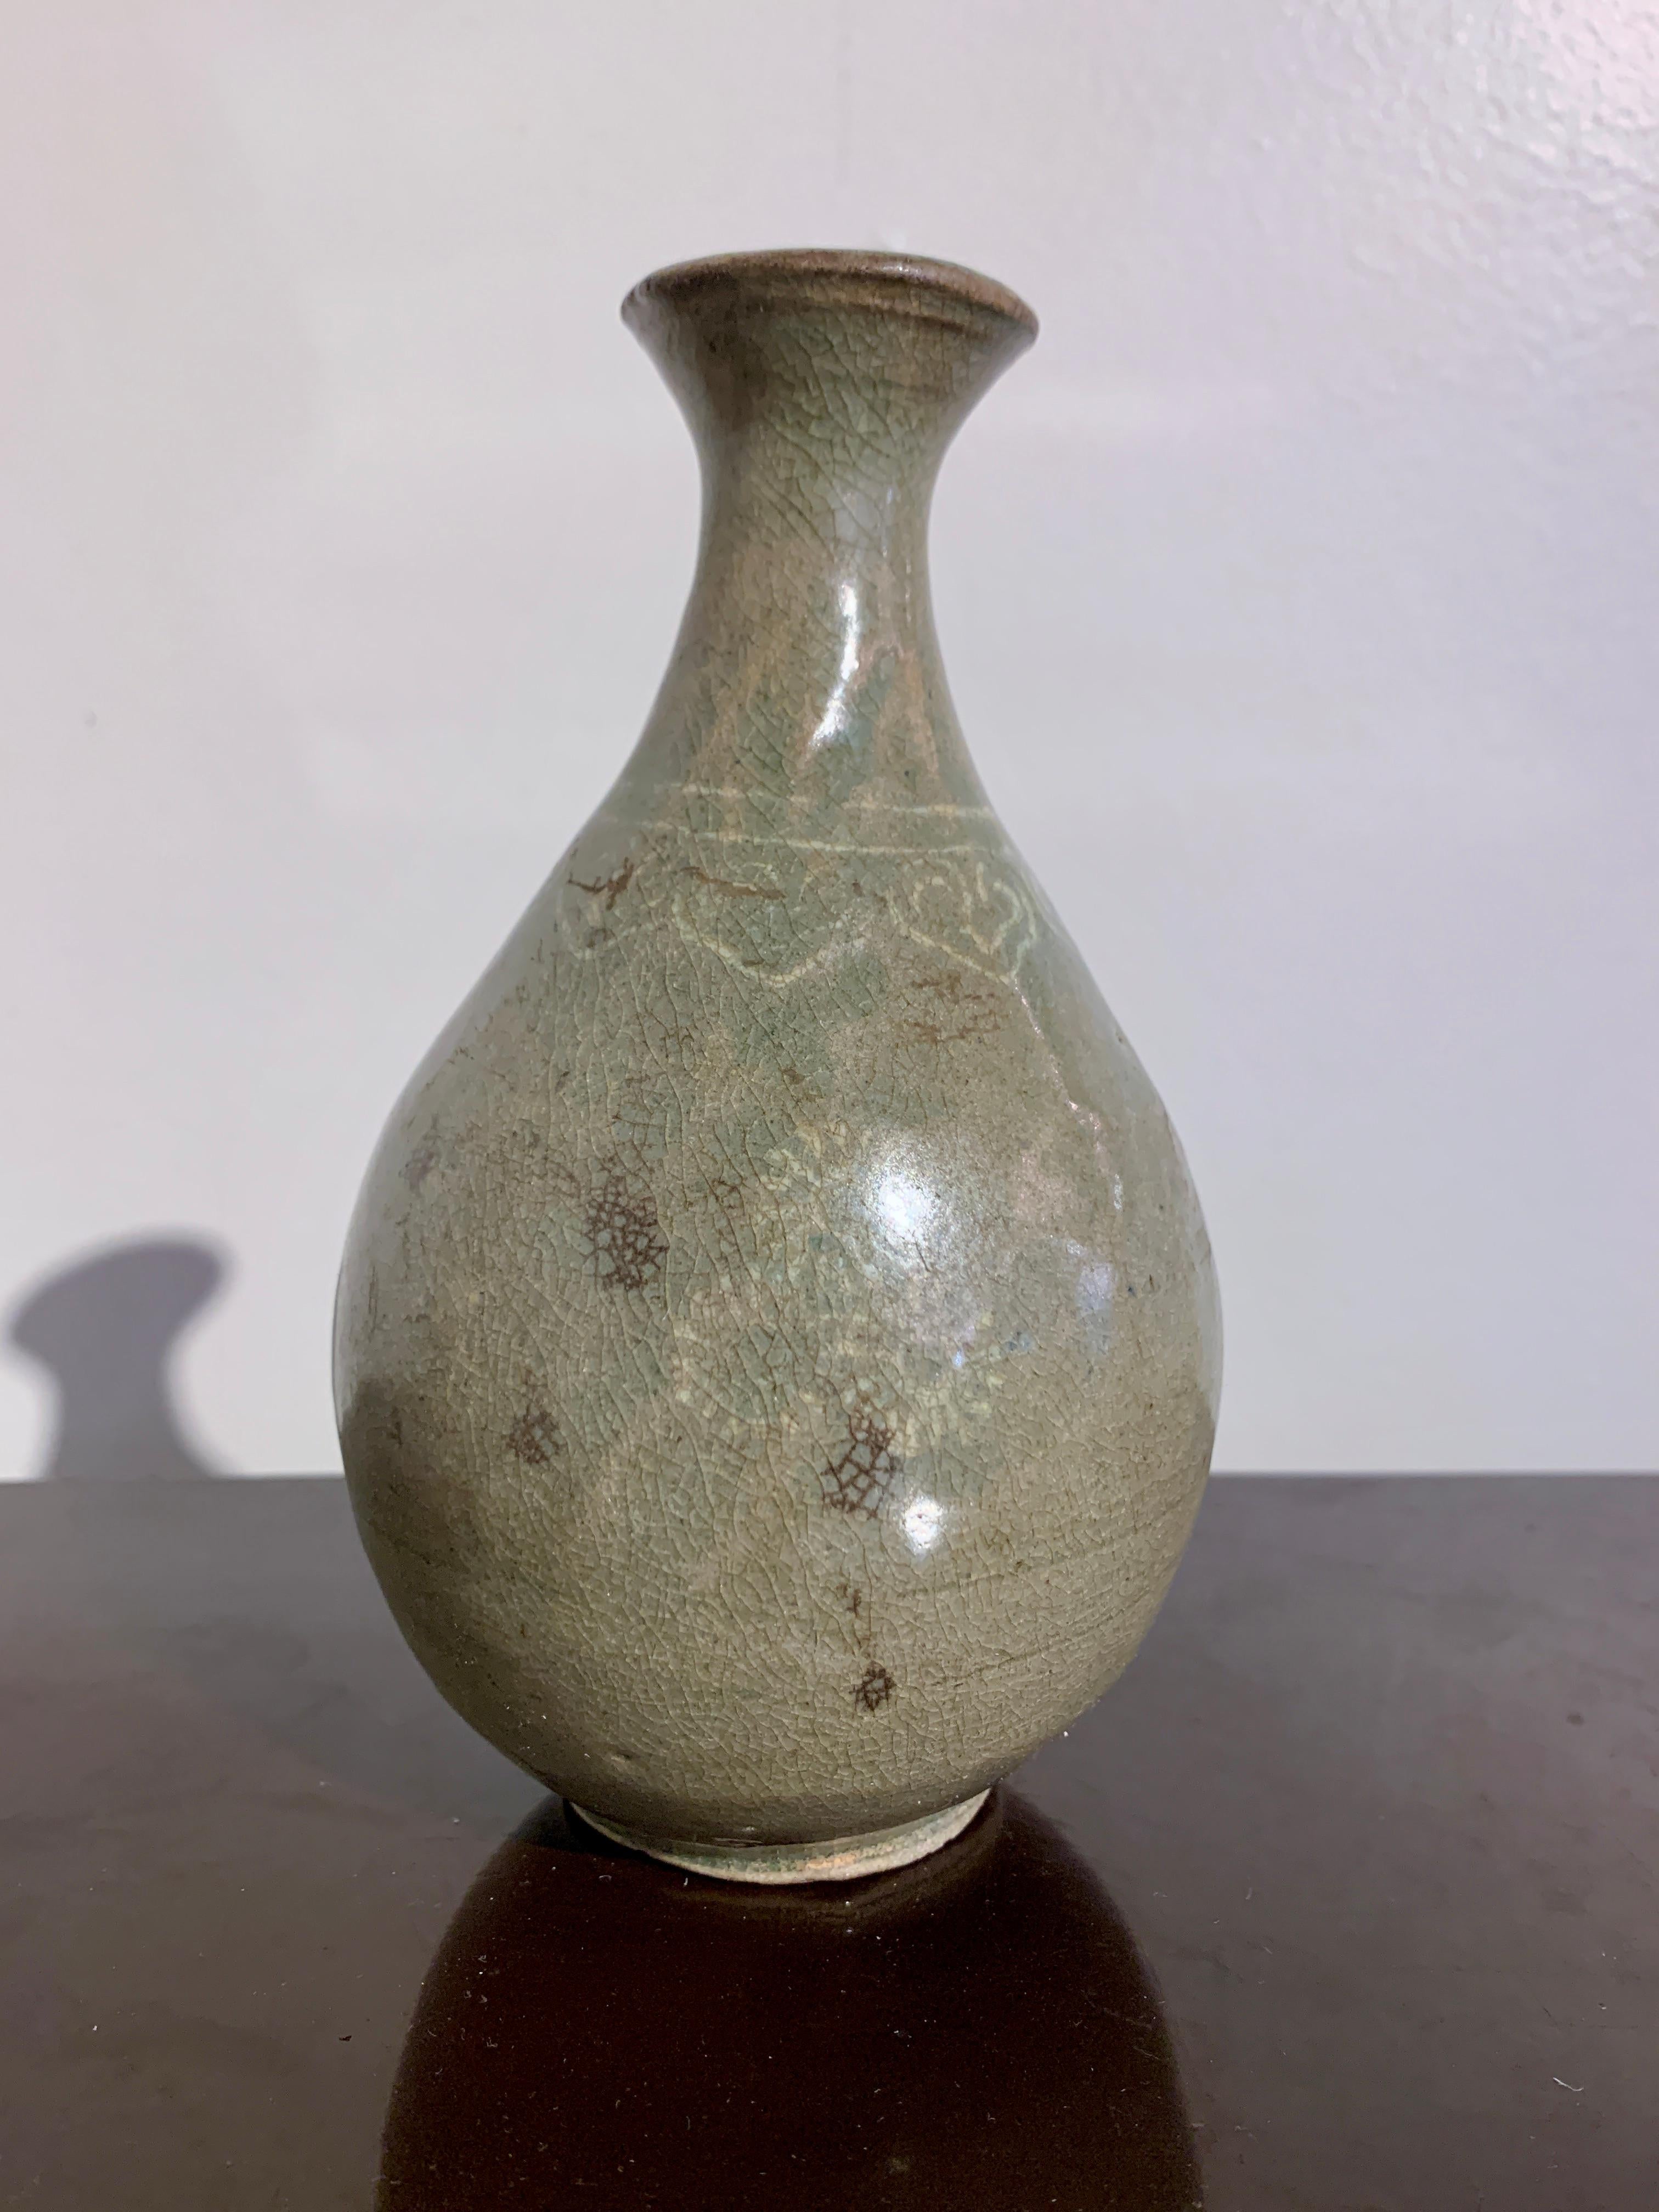 A delightful small Korean Goryeo ware celadon glazed stoneware bottle vase with sangam slip inlay, Goryeo Dynasty, 12th - 13th century, Korea.

The small bottle vase of typical form and crafted from a porcelaneous stoneware with a pear shaped